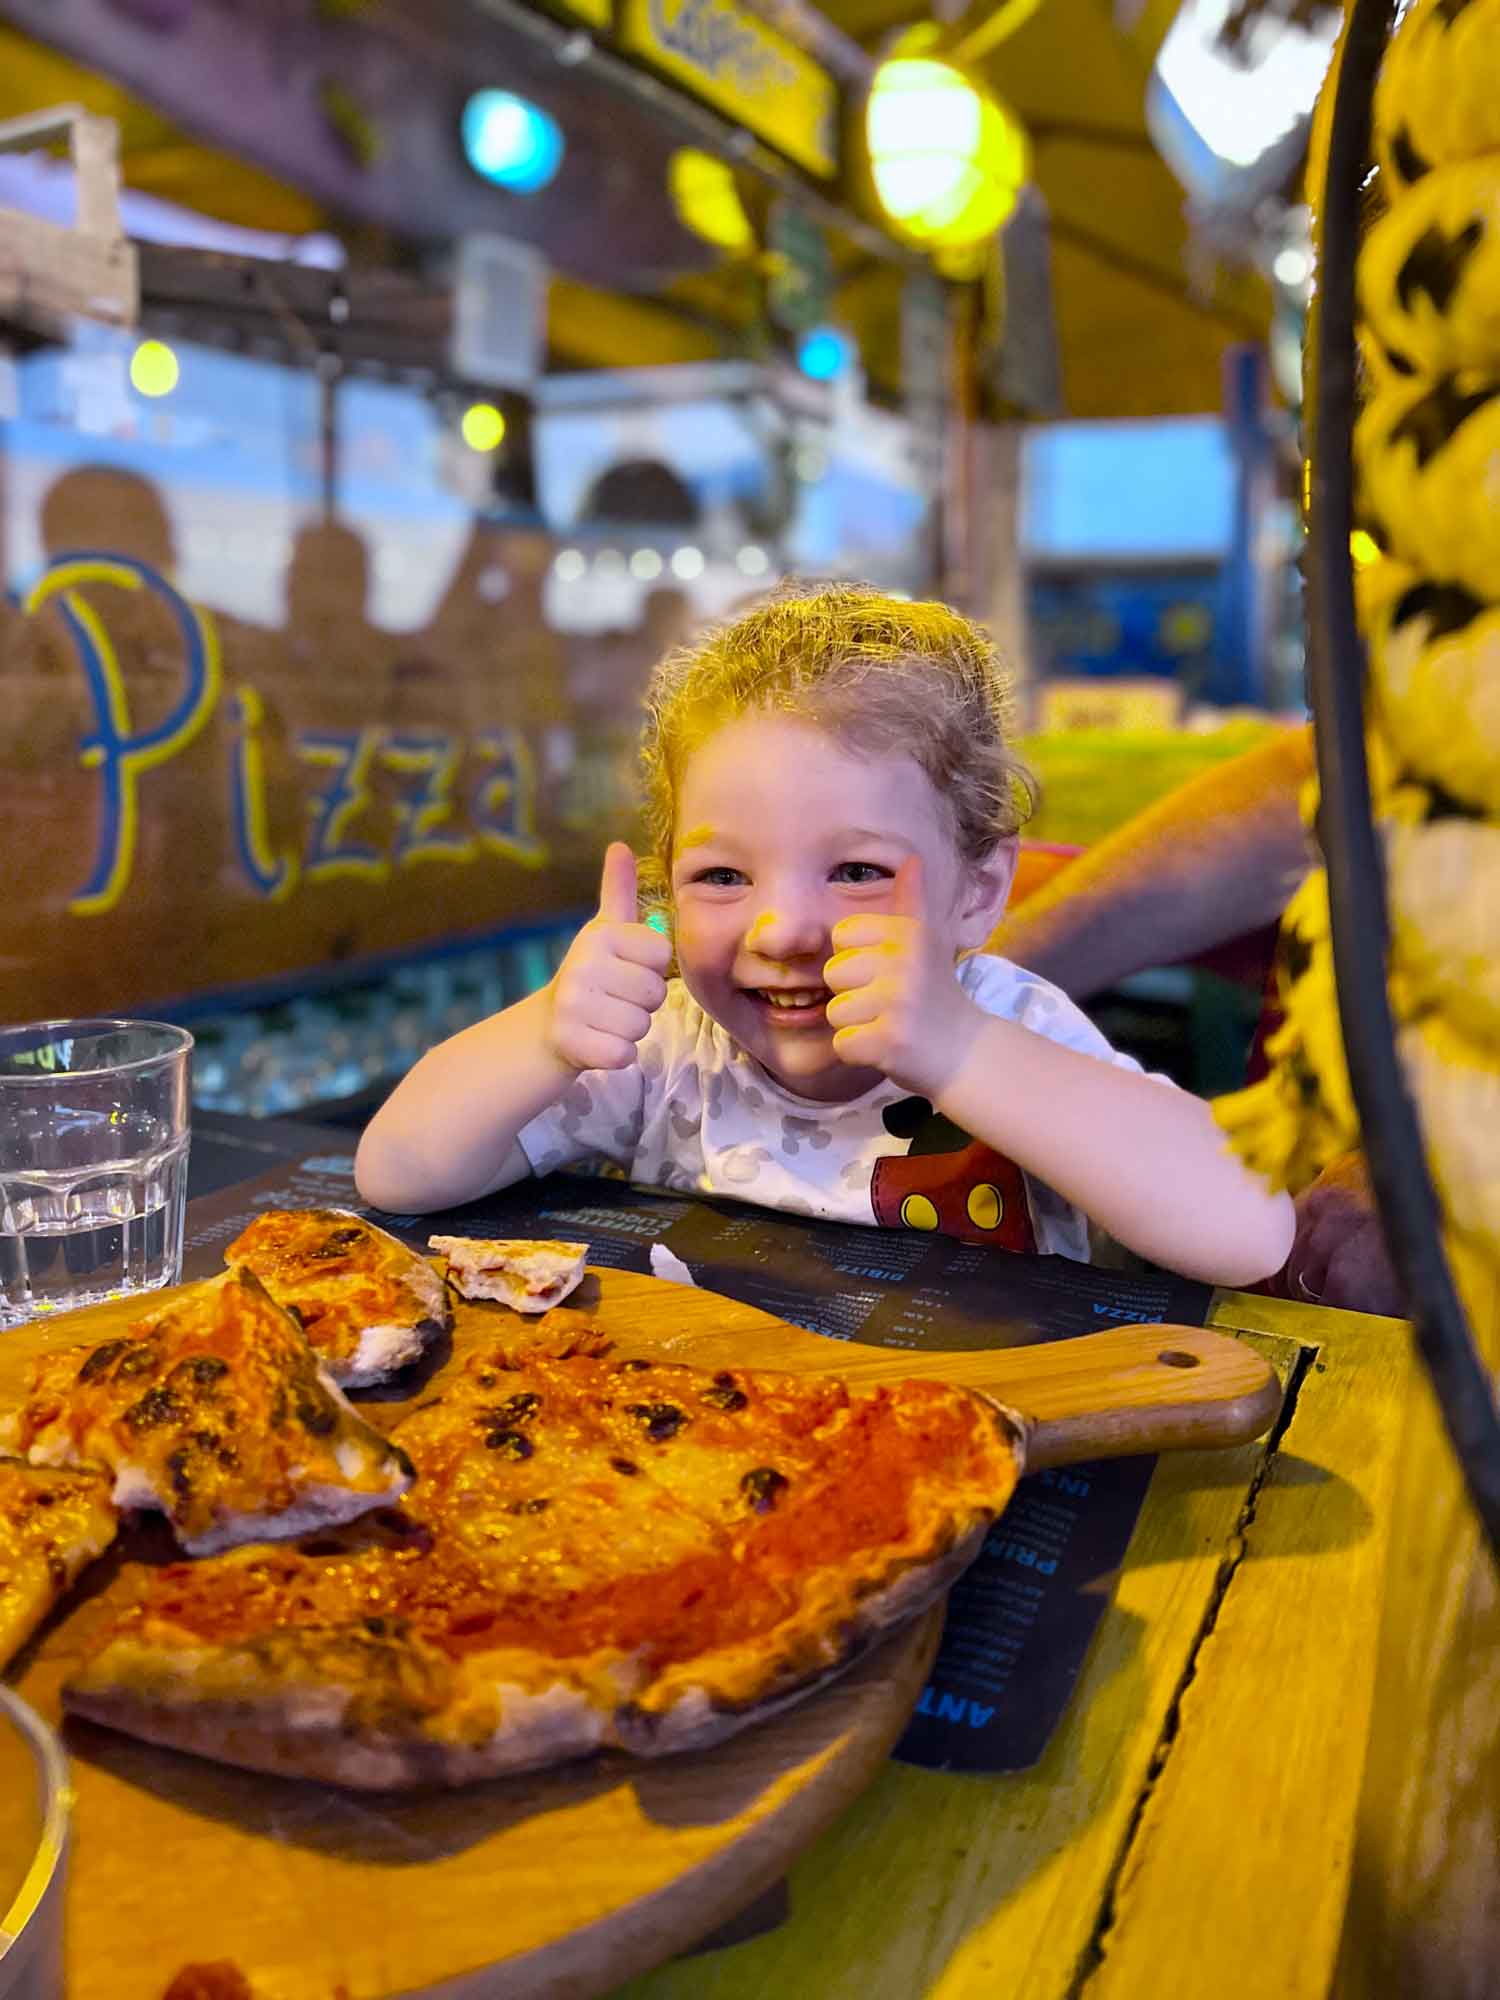 little girl with a pizza and a thumbs up